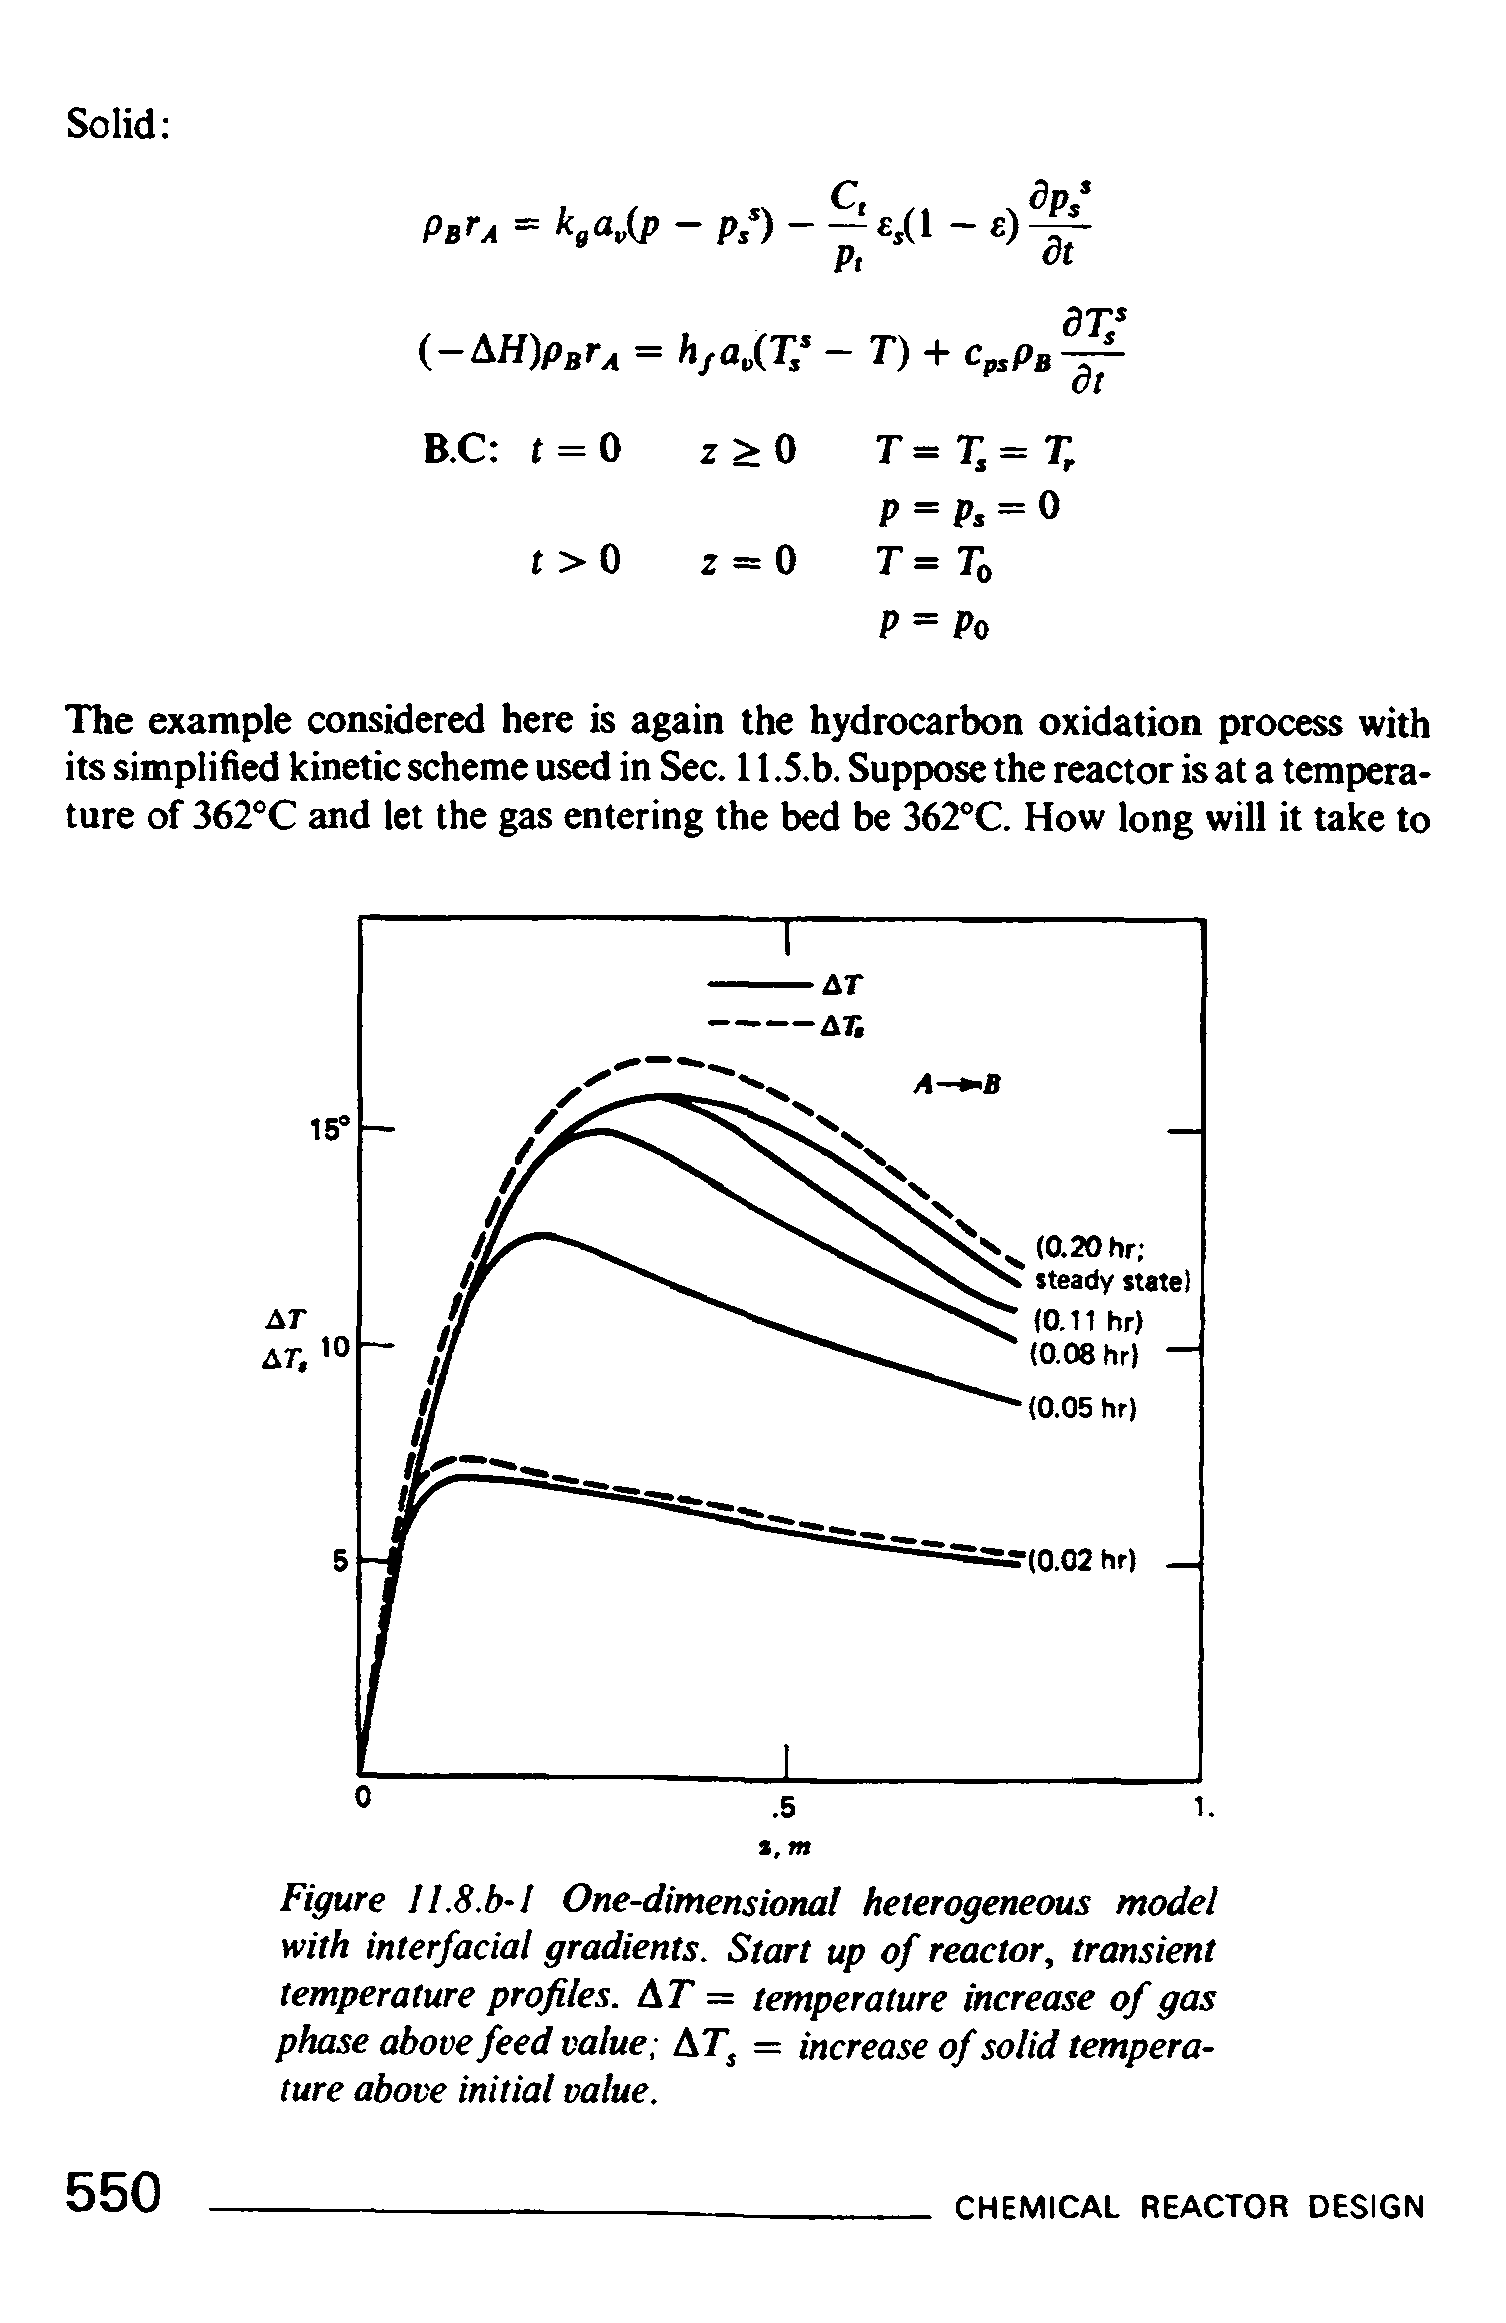 Figure II.8.b-I One-dimensional heterogeneous model with interfacial gradients. Start up of reactor, transient temperature profiles. AT = temperature increase of gas phase above feed value AT = increase of solid temperature above initial value.